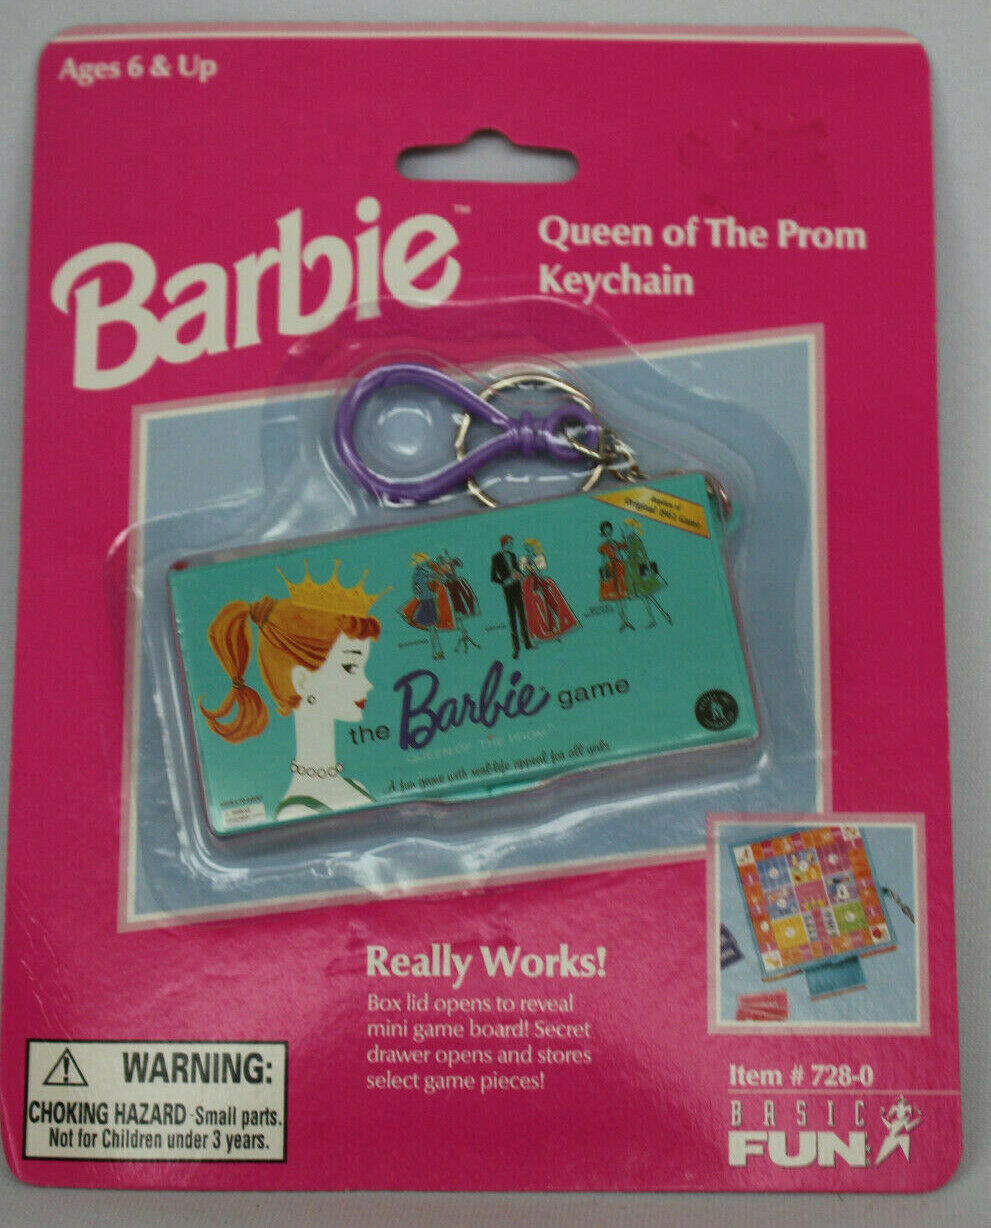 Nrfb 1999 Barbie Queen Of The Prom Keychain Boardgame 728-0 Game Vintage Mini